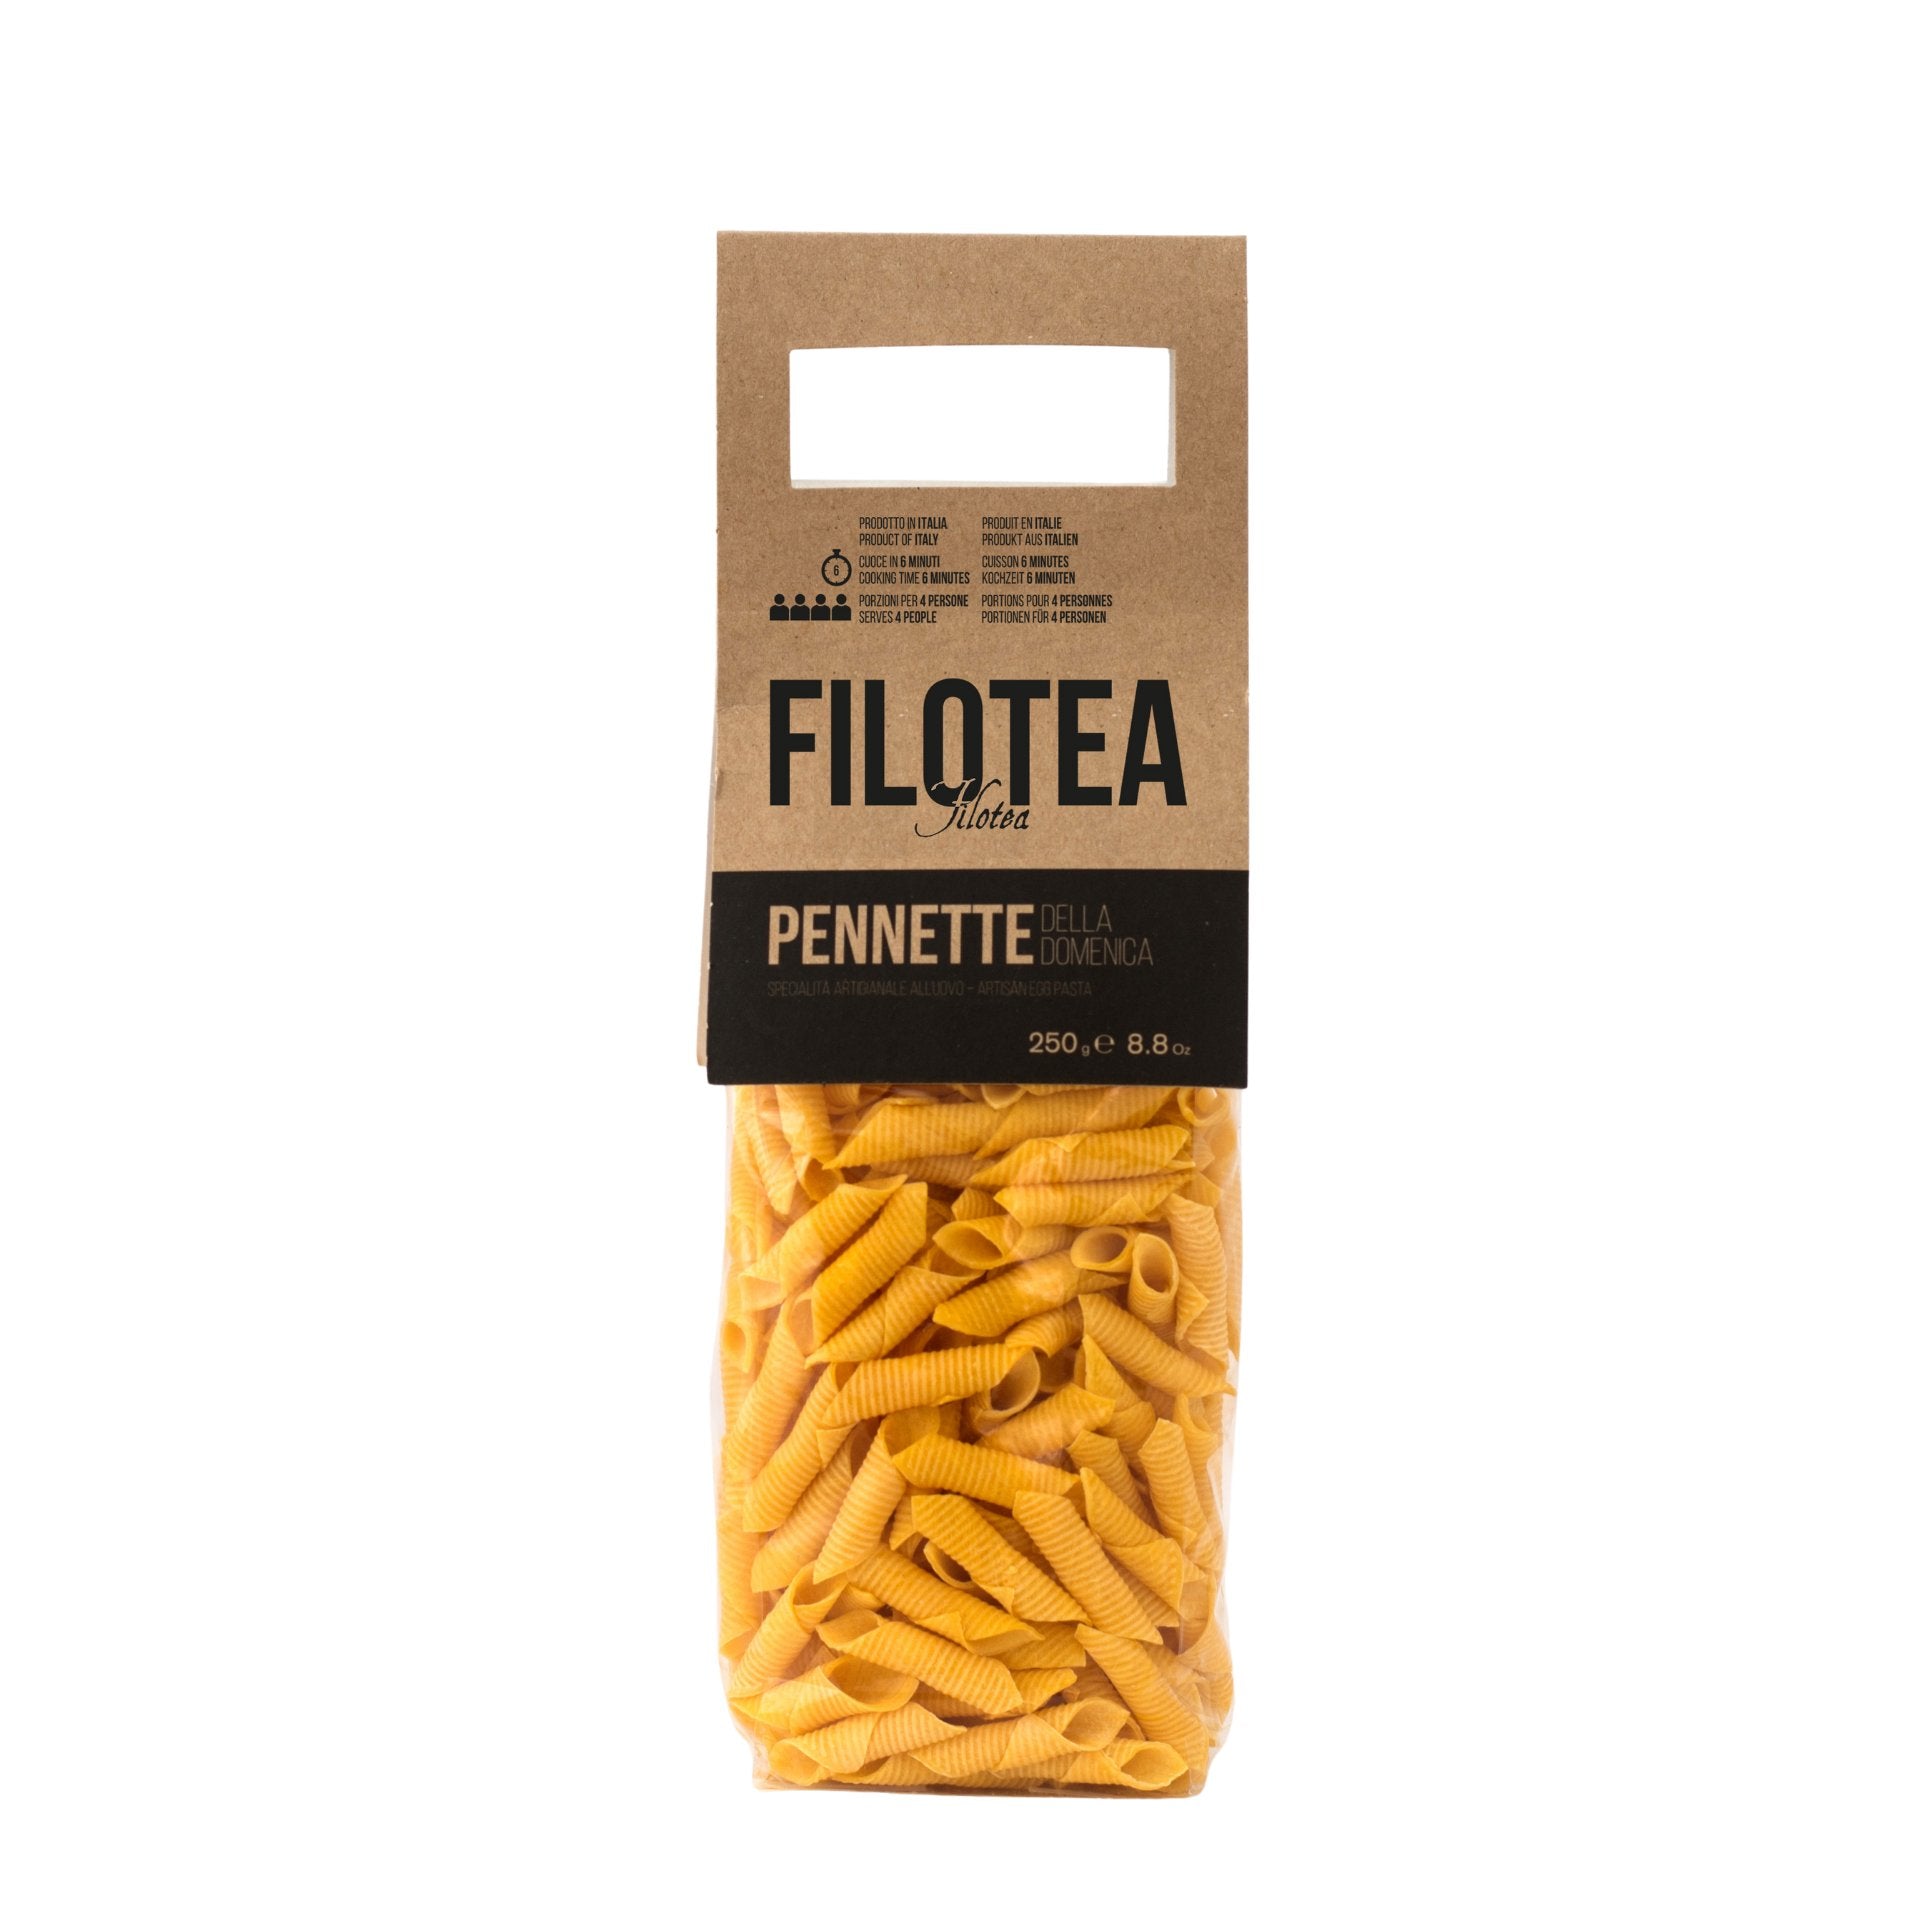 Filotea Pennette della Domenica Artisan Egg Pasta 250g  | Imported and distributed in the UK by Just Gourmet Foods